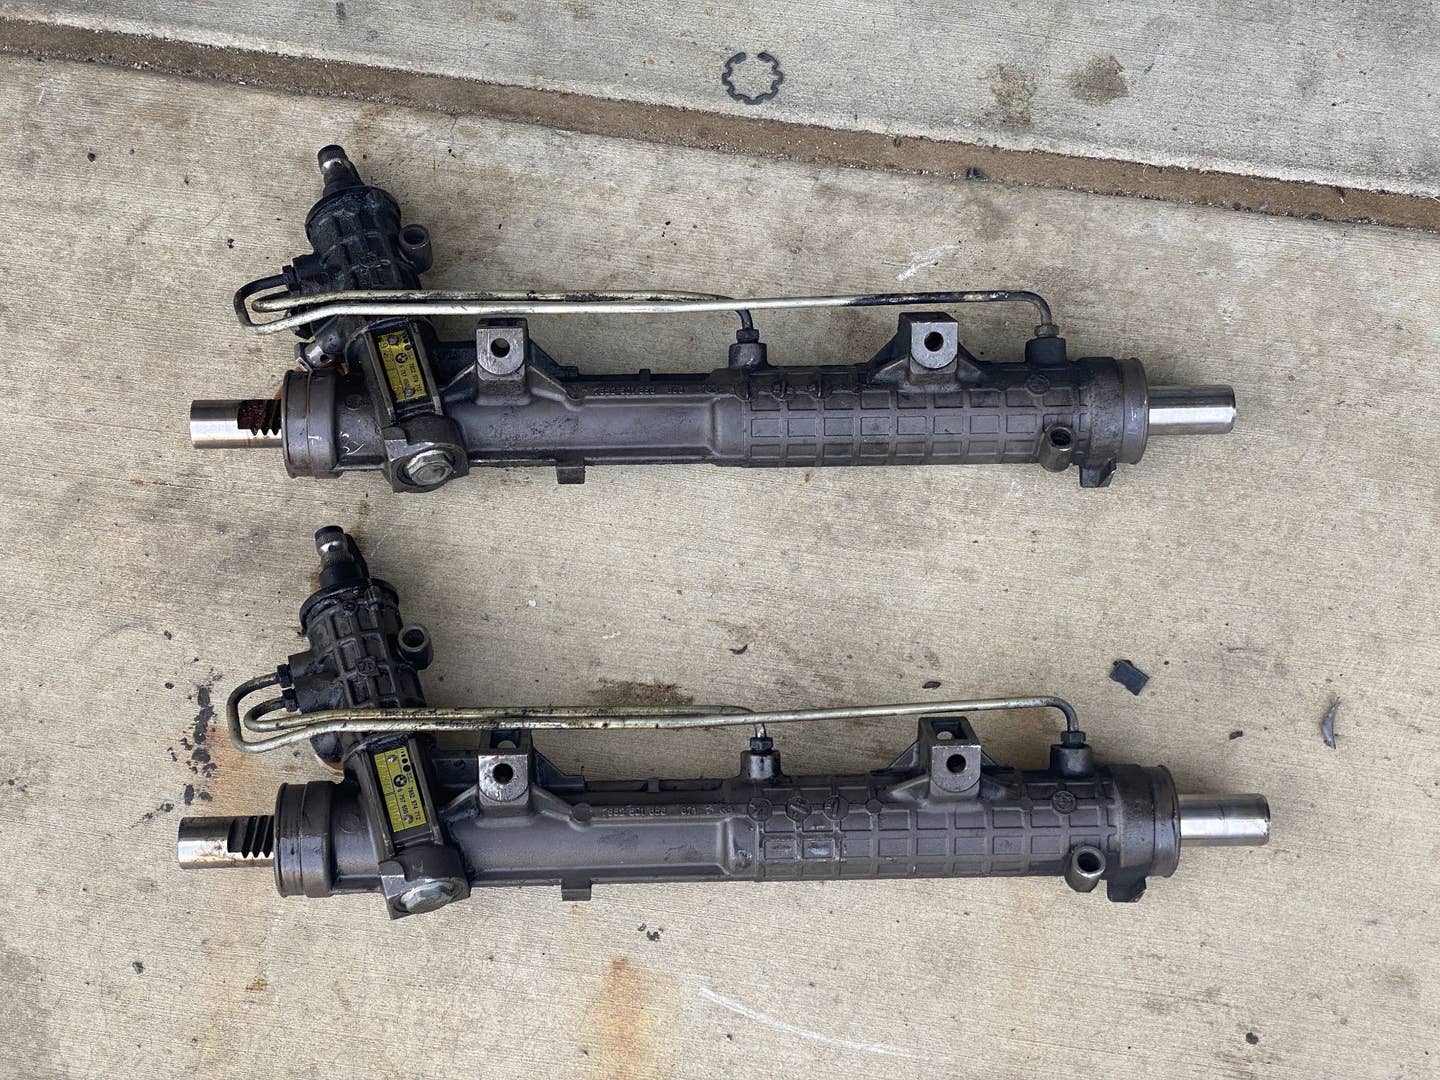 Two steering racks lay side by side on concrete. They both have a gold tag on the input shaft.